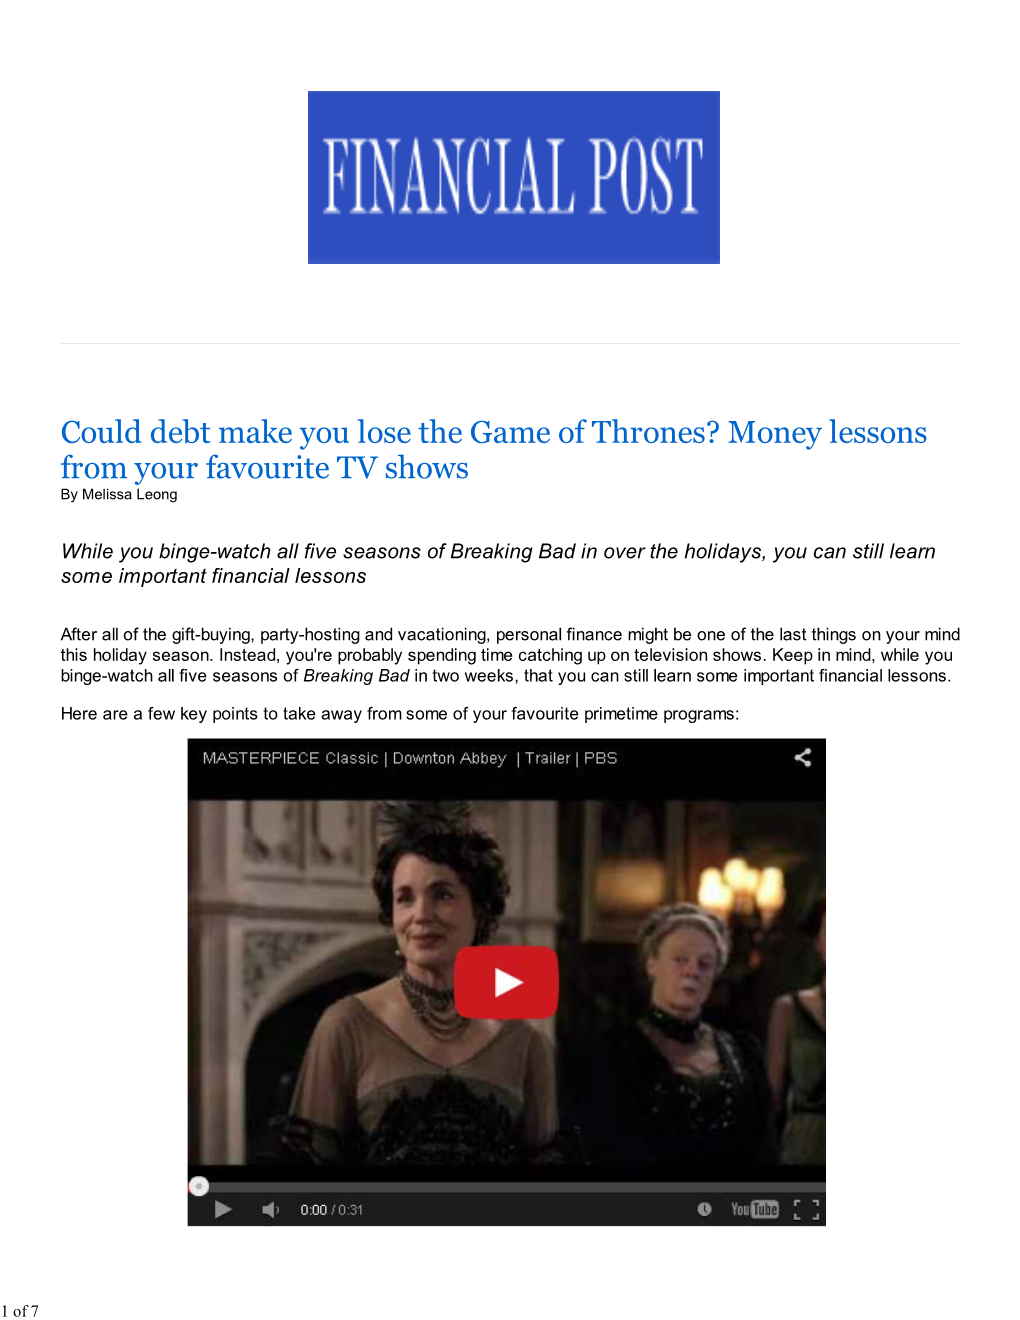 Financial Post: Could Debt Make You Lose the Game of Thrones